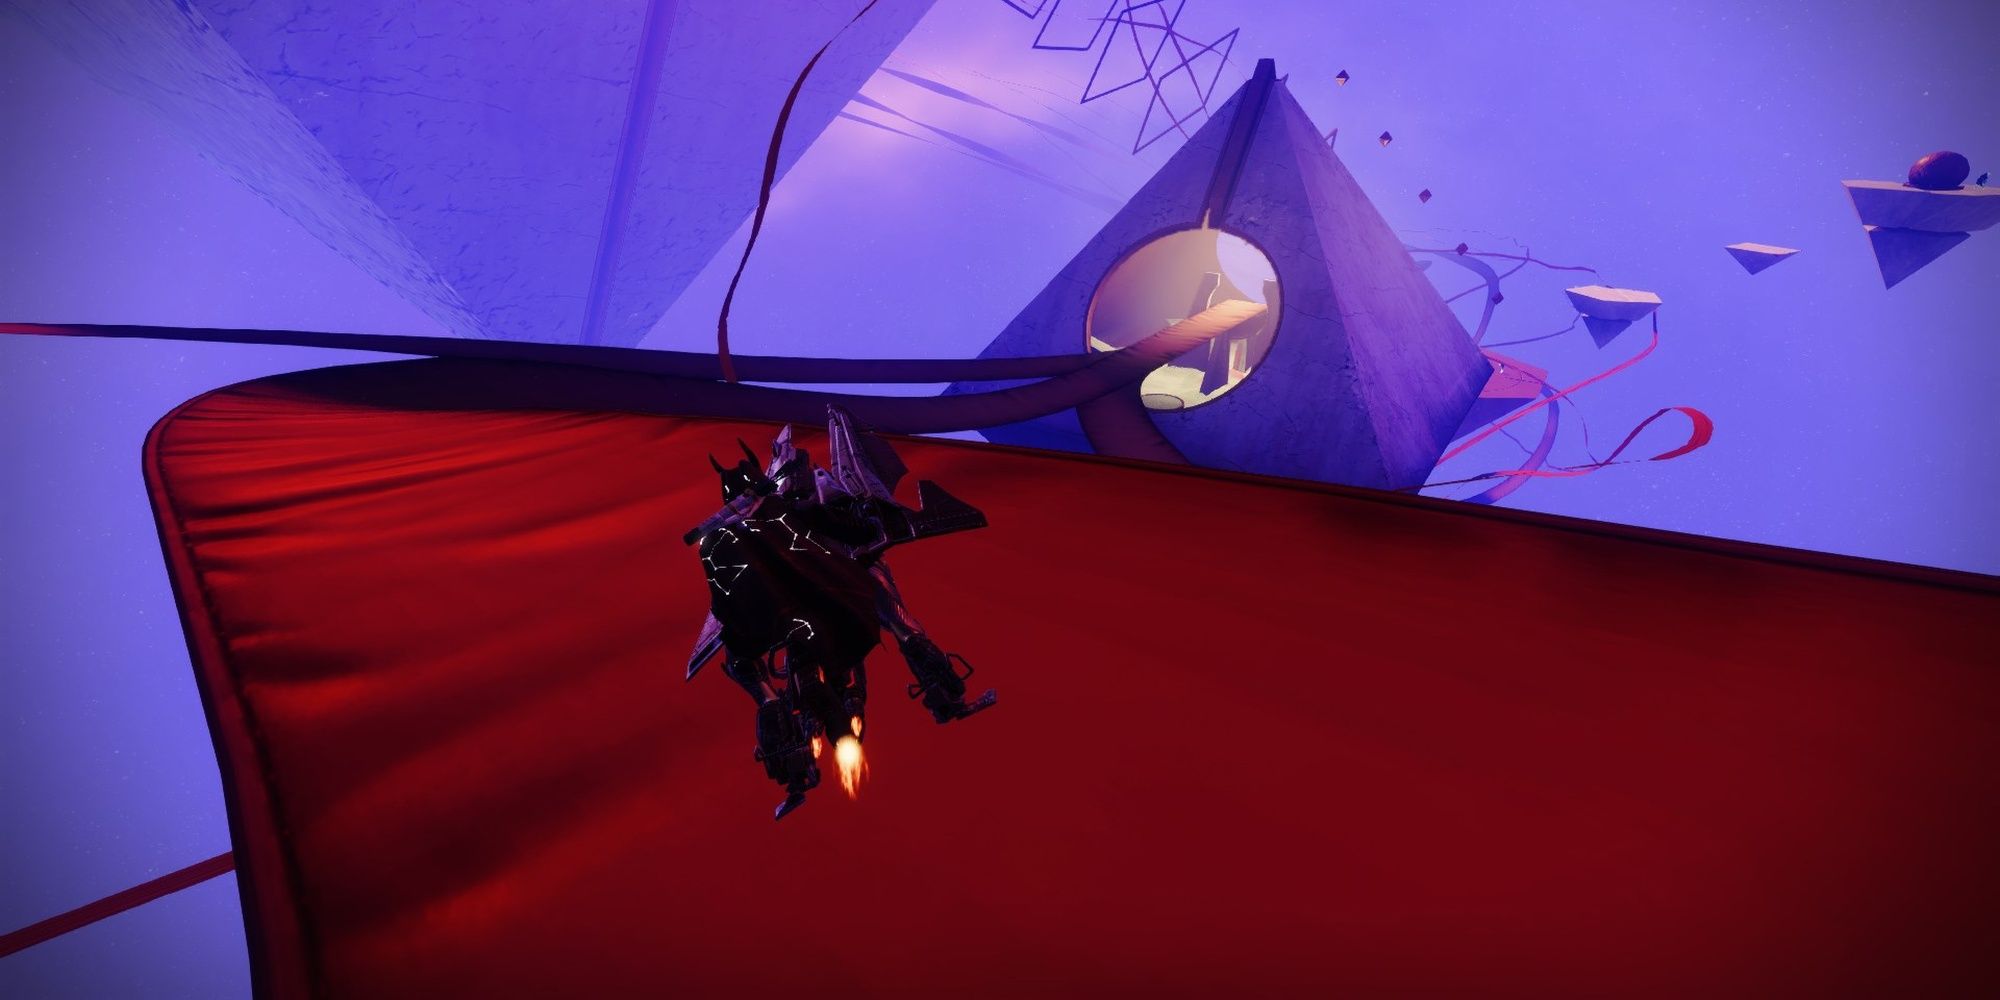 A player using a jet pack in a red large aisle inside a crystal with holes.